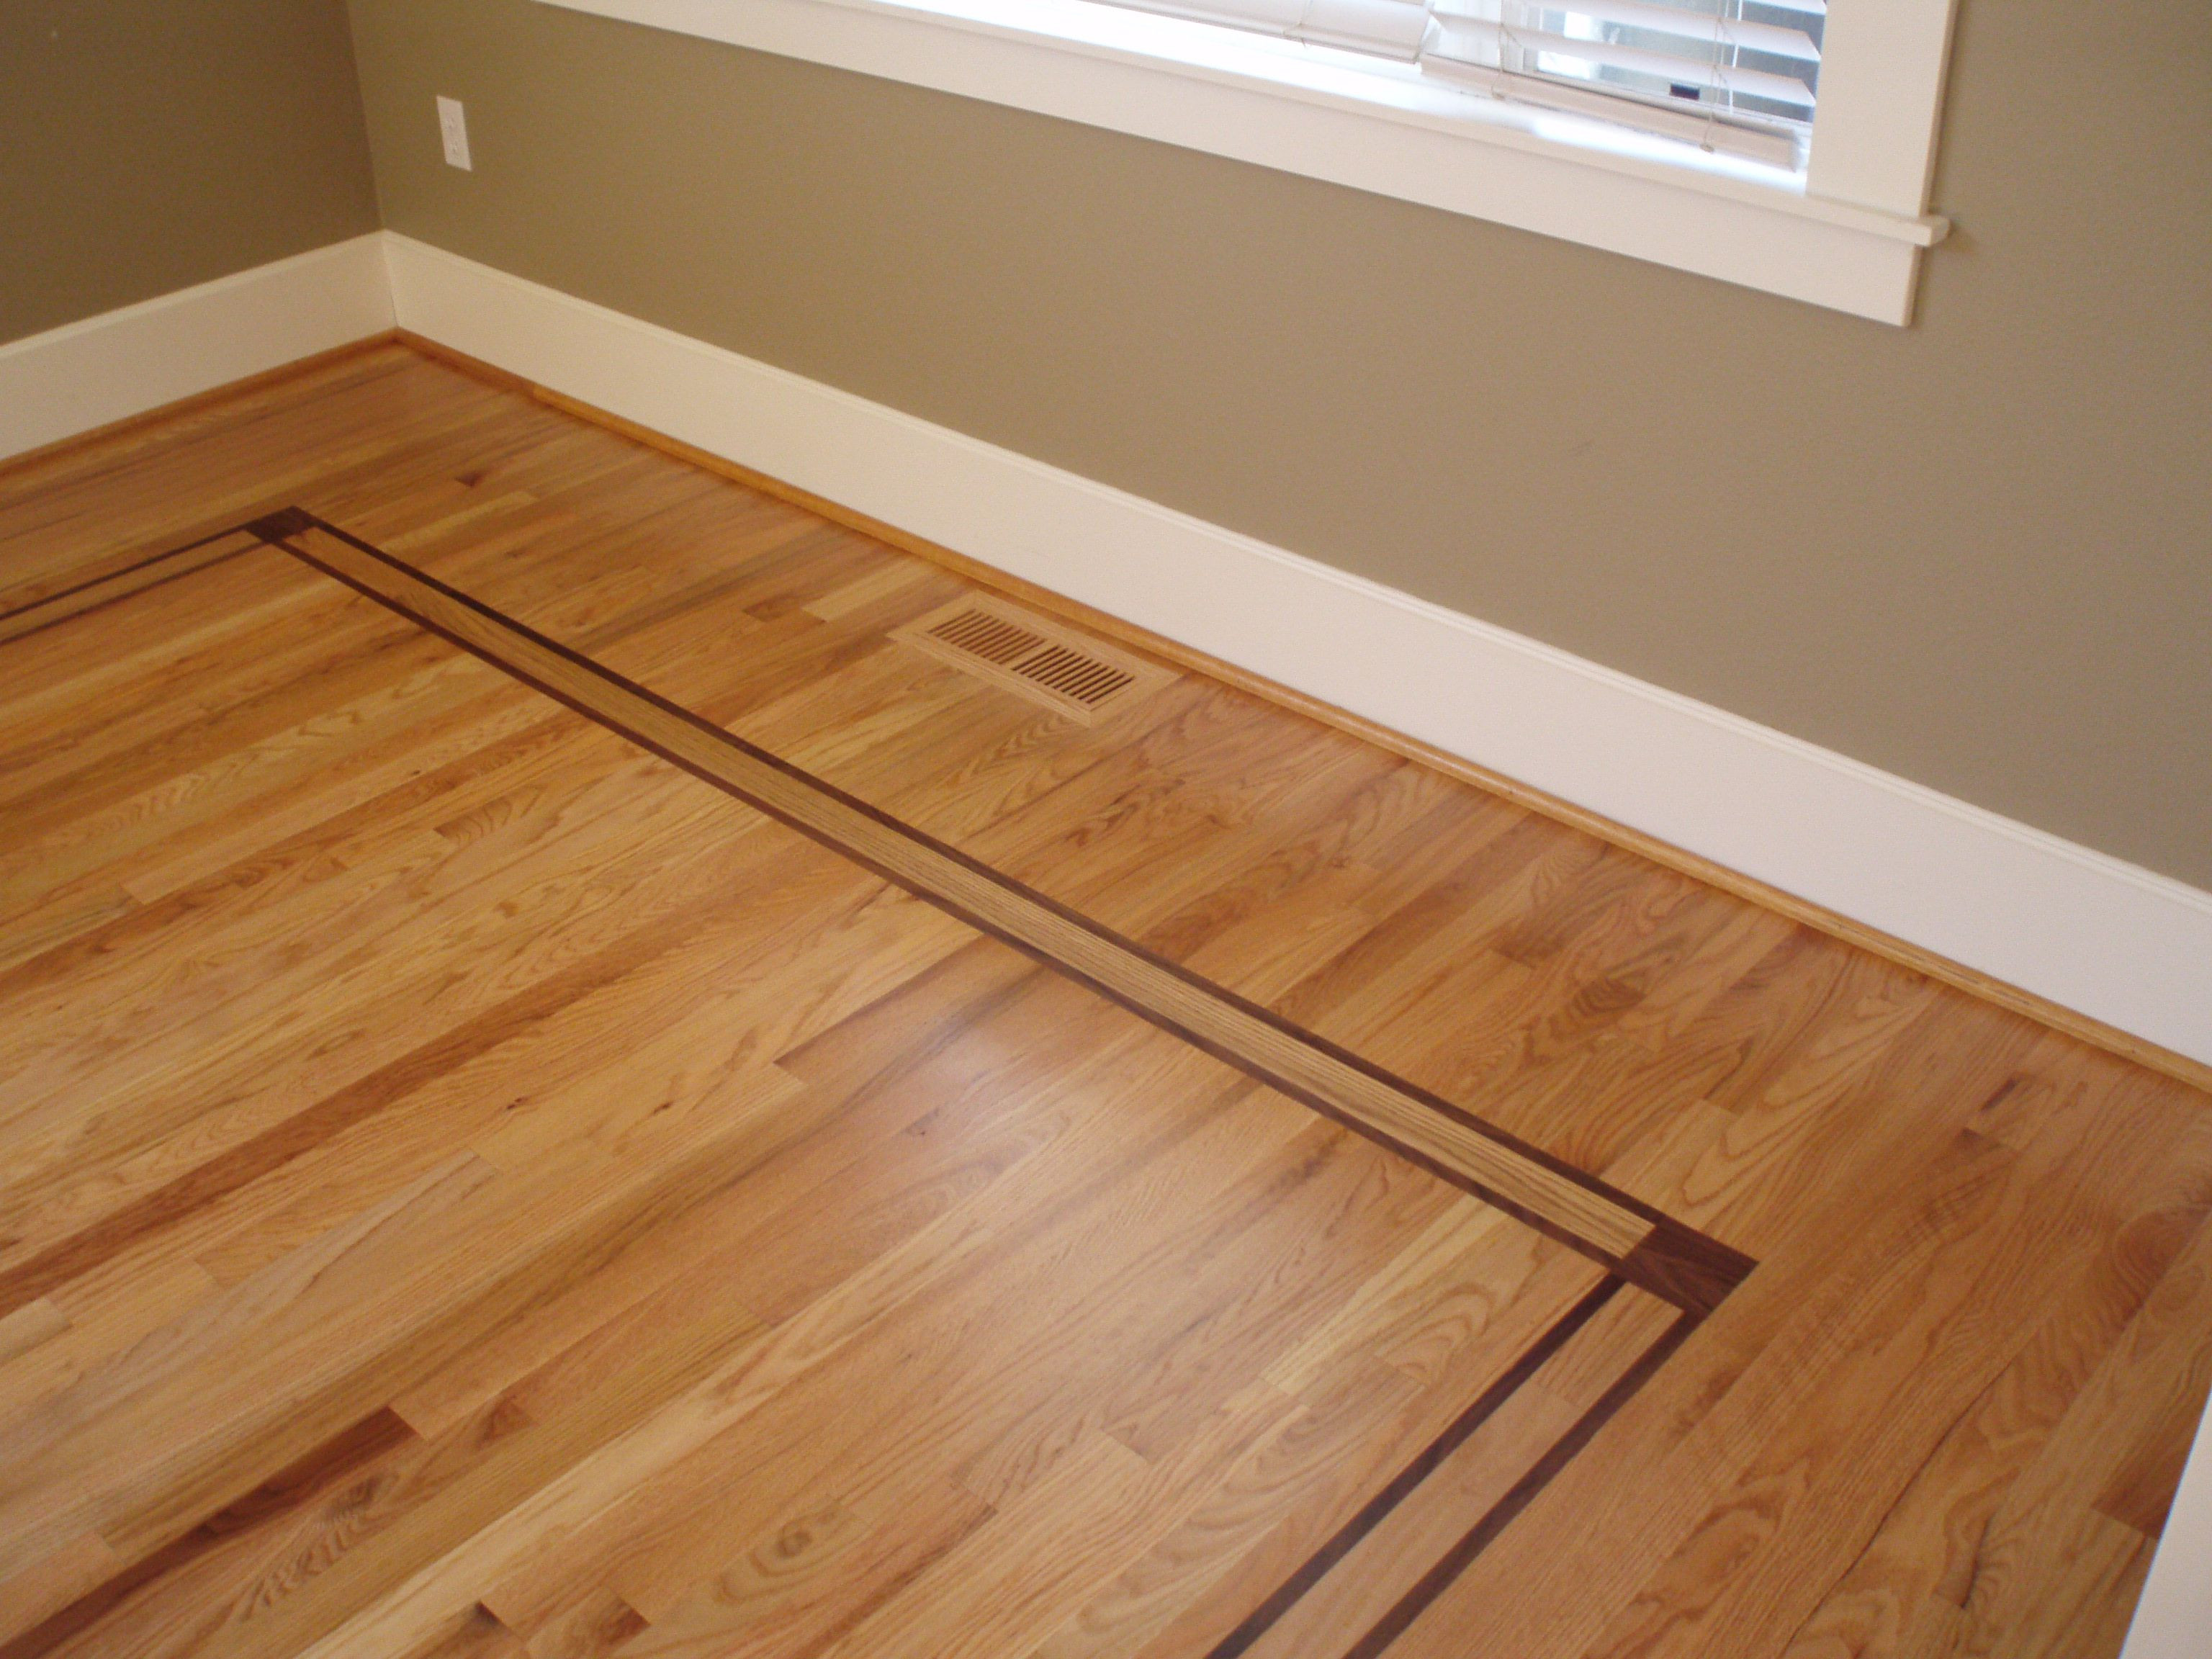 19 Recommended Unfinished Walnut Hardwood Flooring 2024 free download unfinished walnut hardwood flooring of inlay of walnut with red oak flooring www dominohardwoodfloors com in inlay of walnut with red oak flooring www dominohardwoodfloors com portland or do